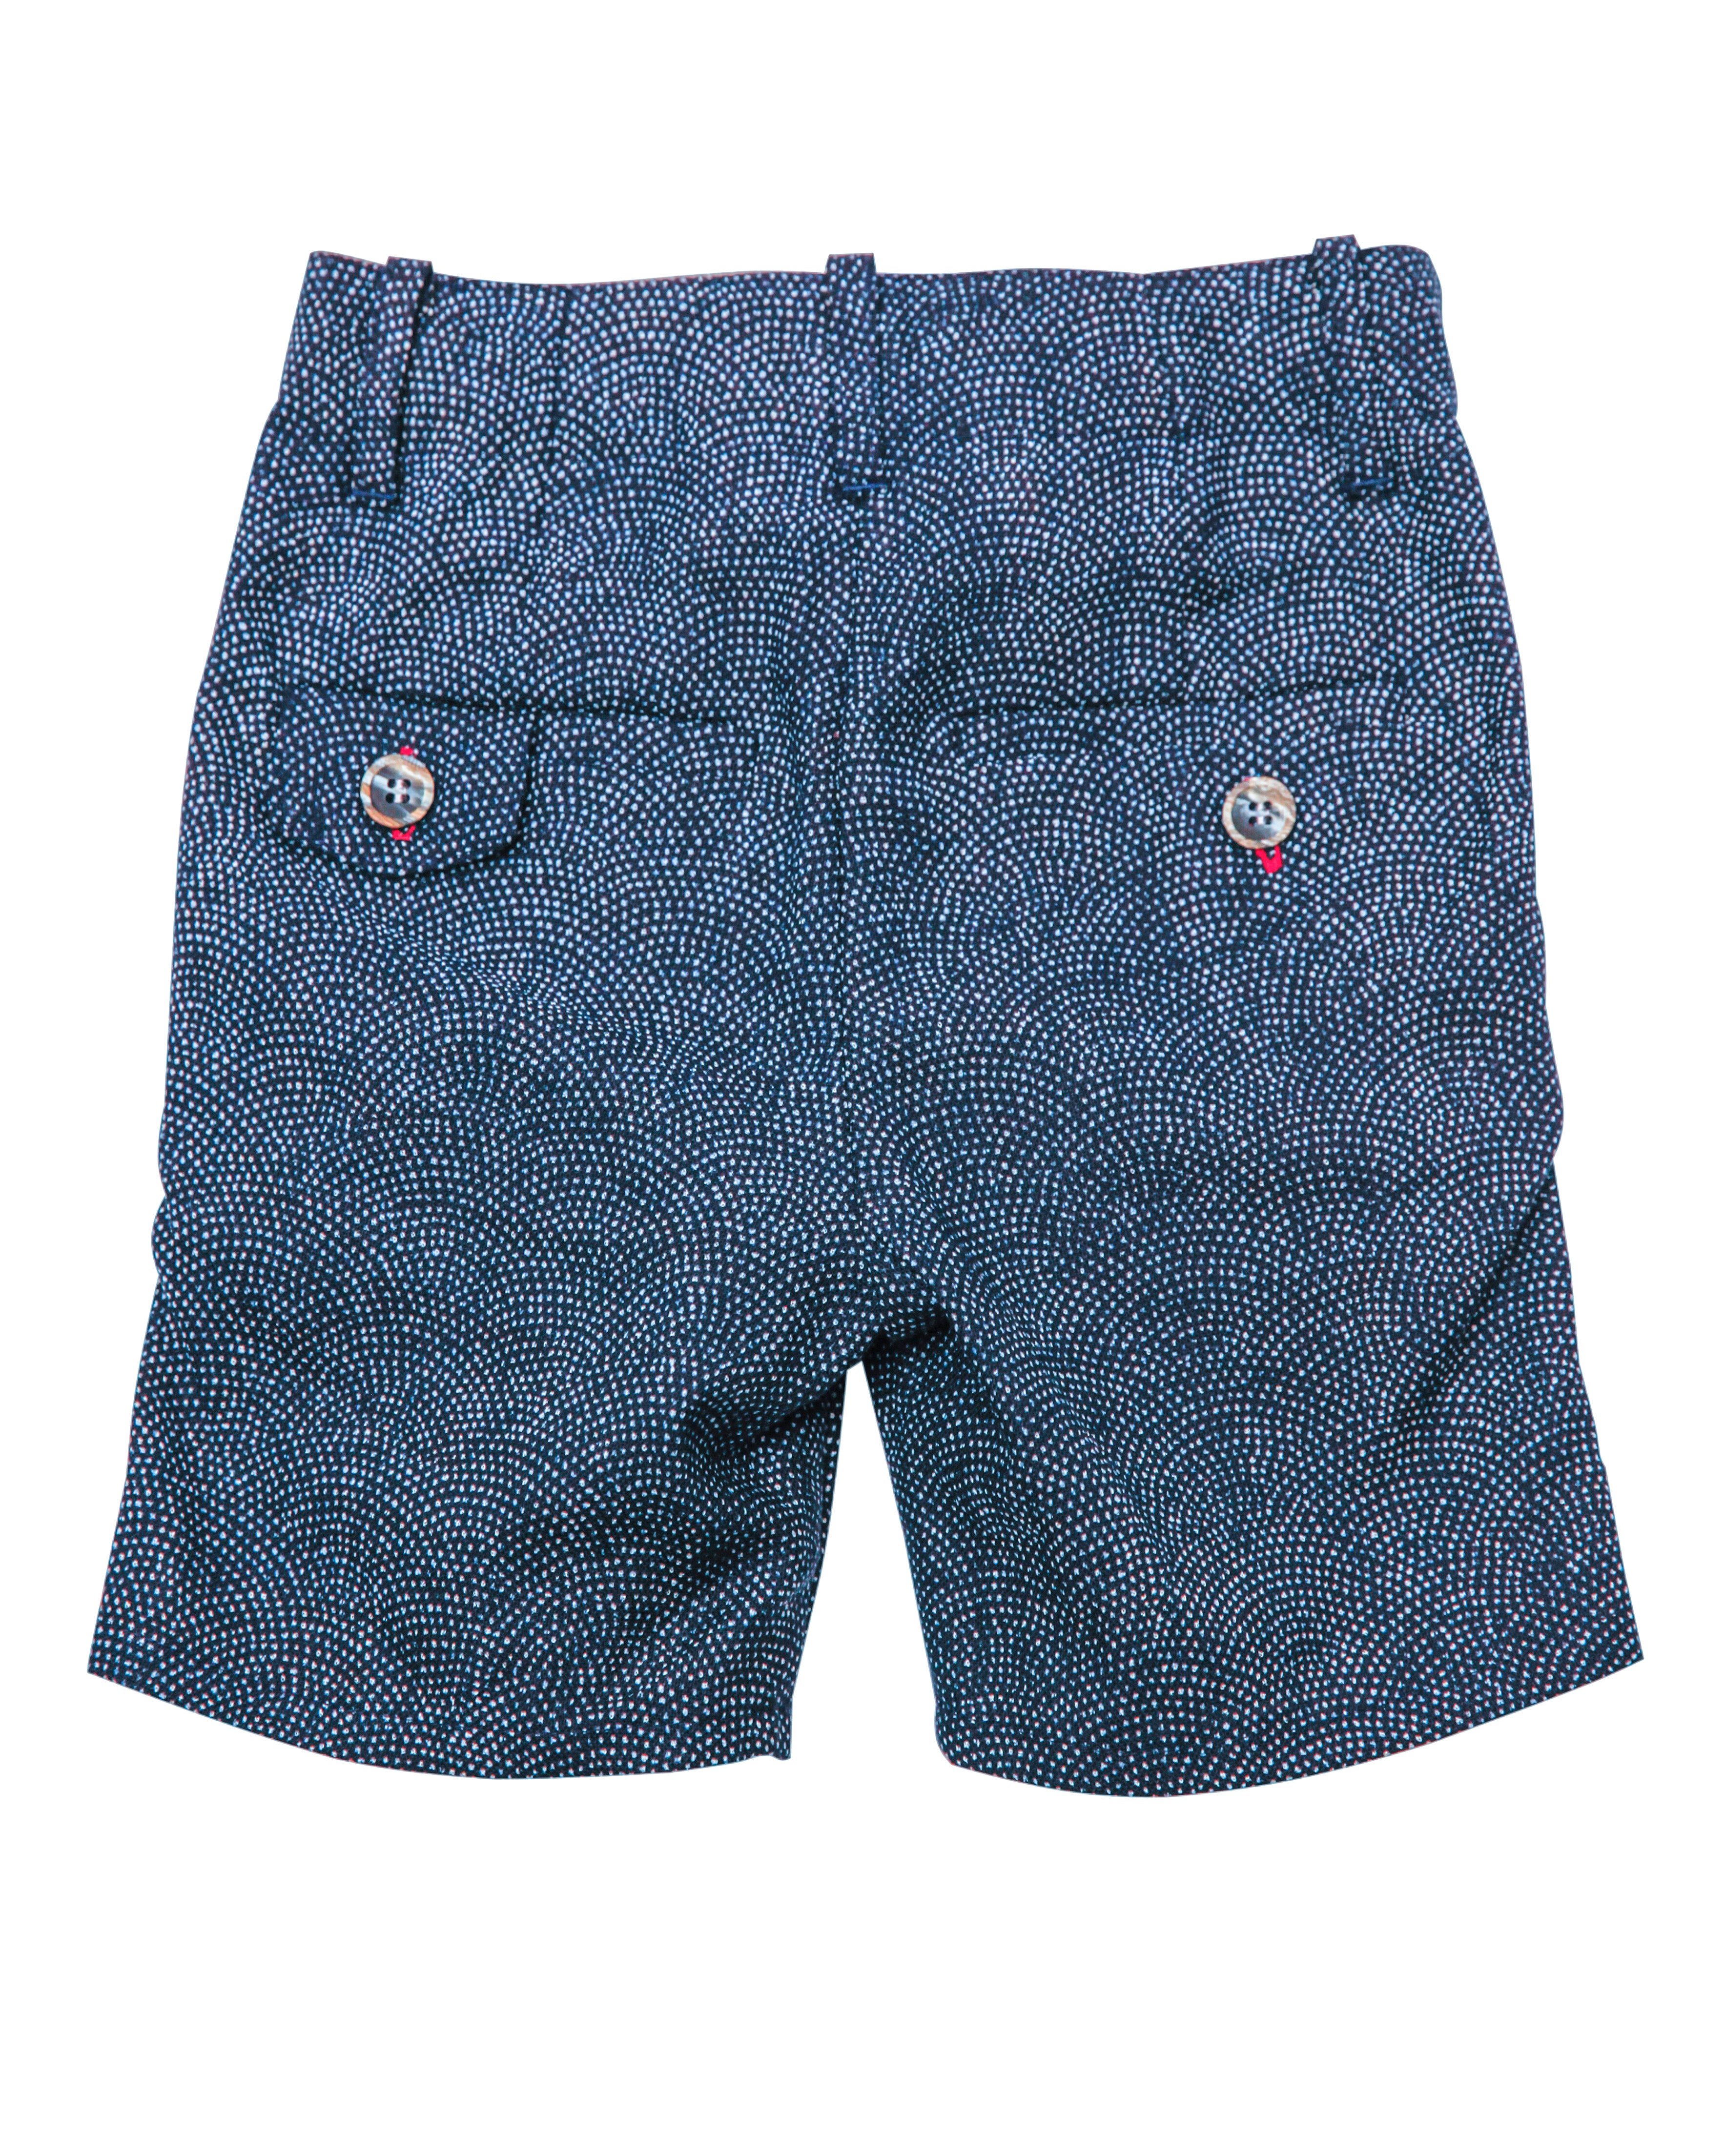 Kids Summer Shorts Navy with White Dots - back